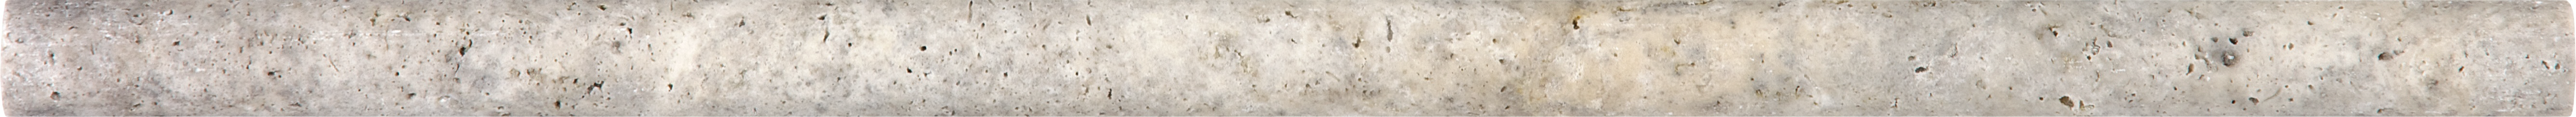 travertine pattern natural stone pencil molding from silver ash anatolia collection distributed by surface group international honed finish straight edge edge 5_8x12 bar shape